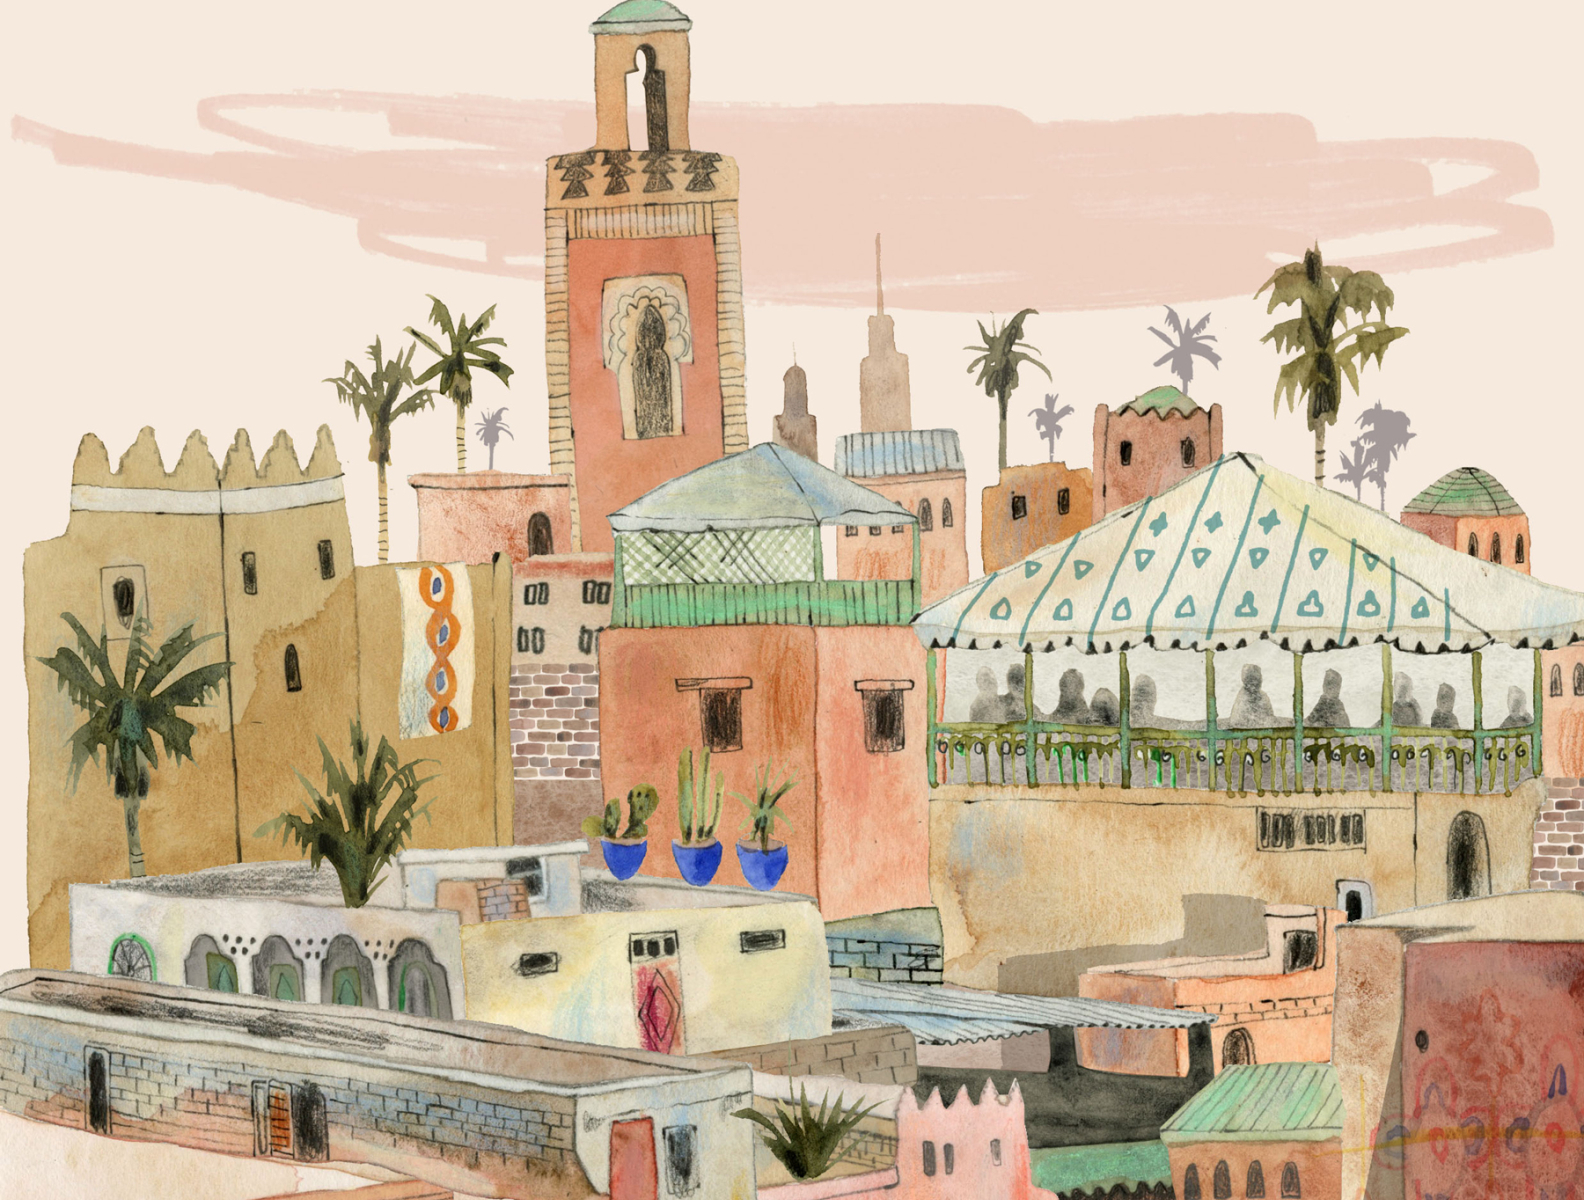 Morocco by Folio Illustration Agency on Dribbble